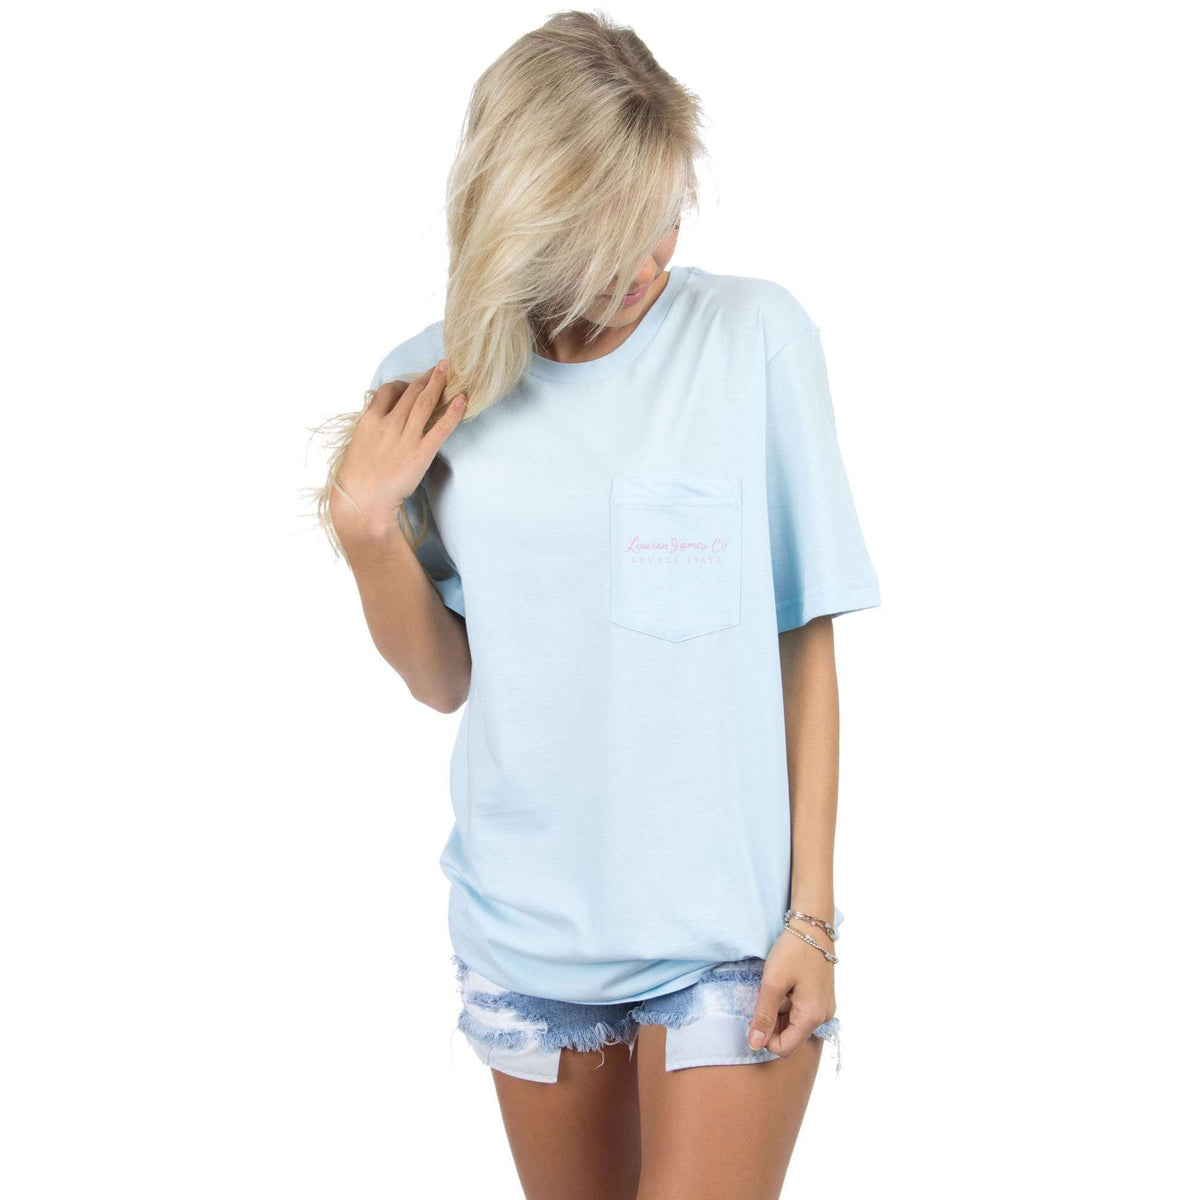 Love Me Some Alabama Tee in Light Blue by Lauren James - Country Club Prep